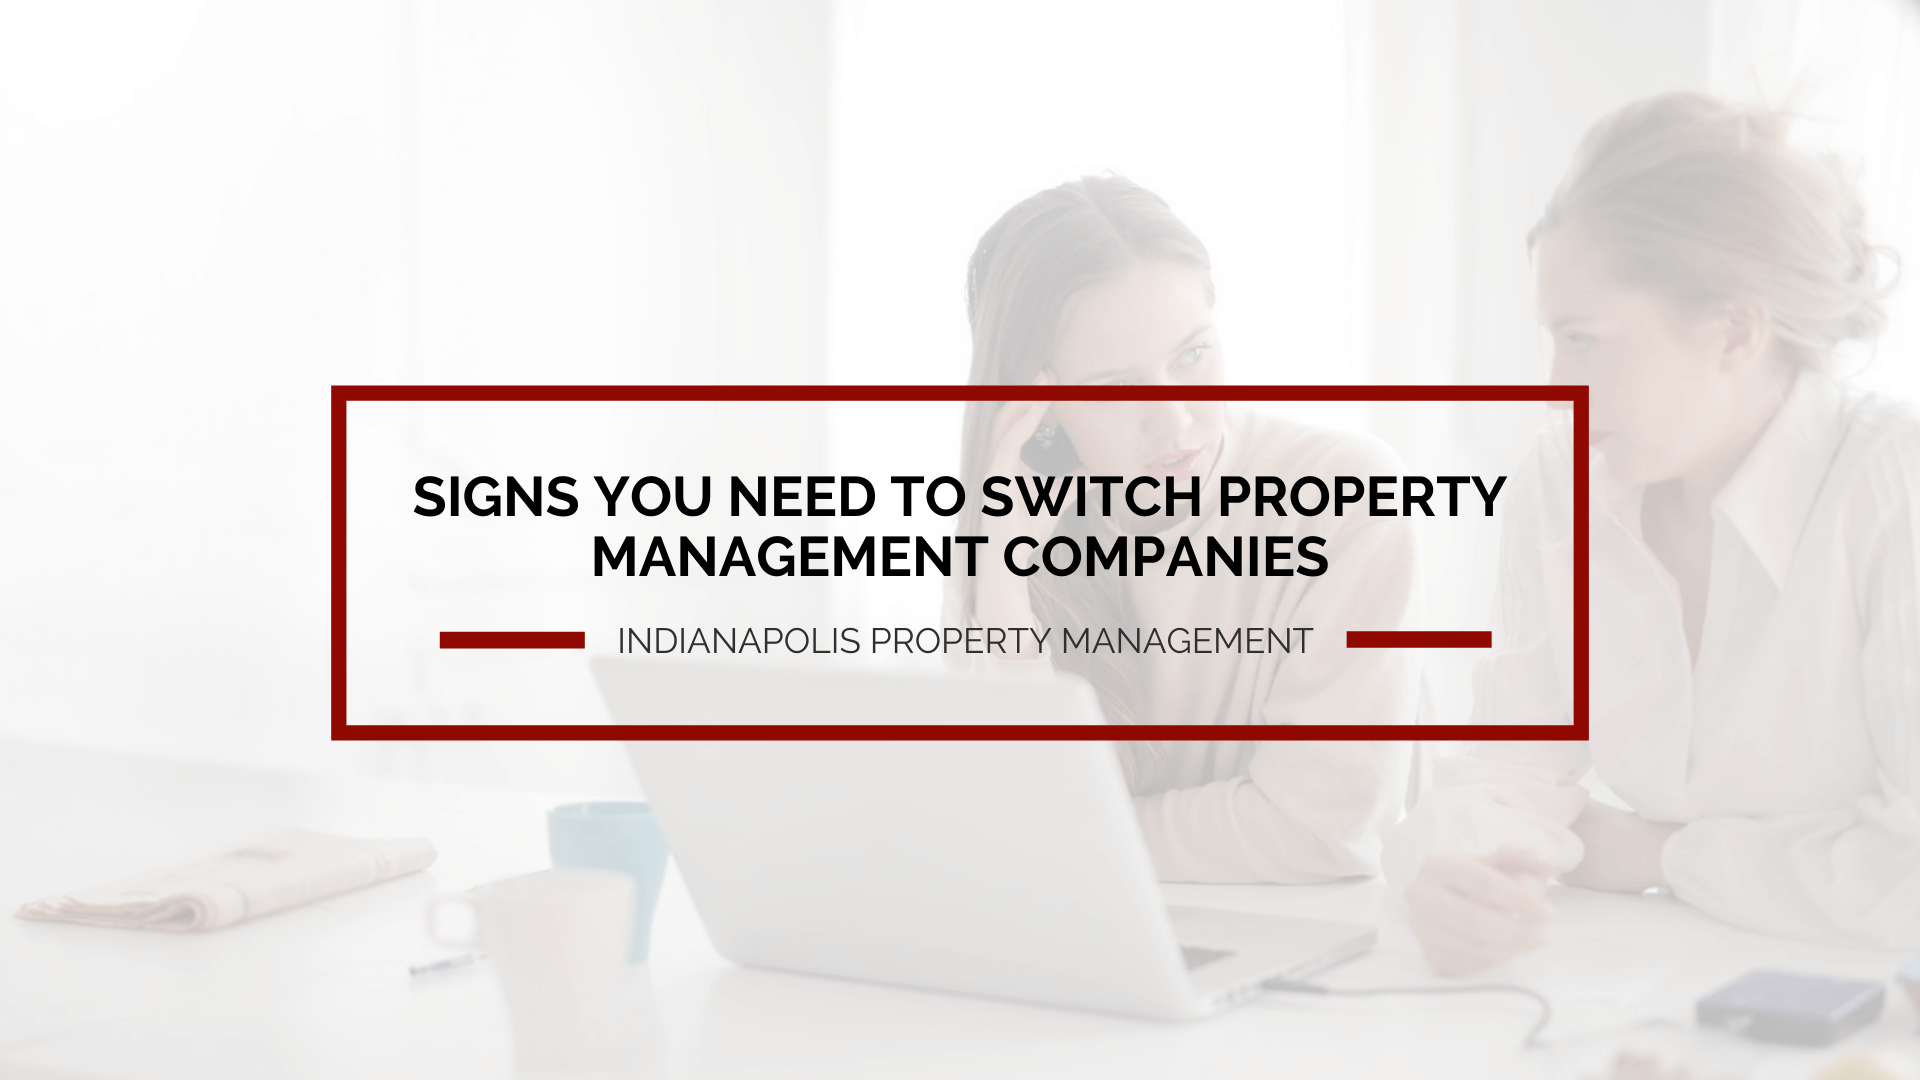 6 Signs You Need to Switch Property Management Companies for Your Indianapolis Rental Investment - article banner